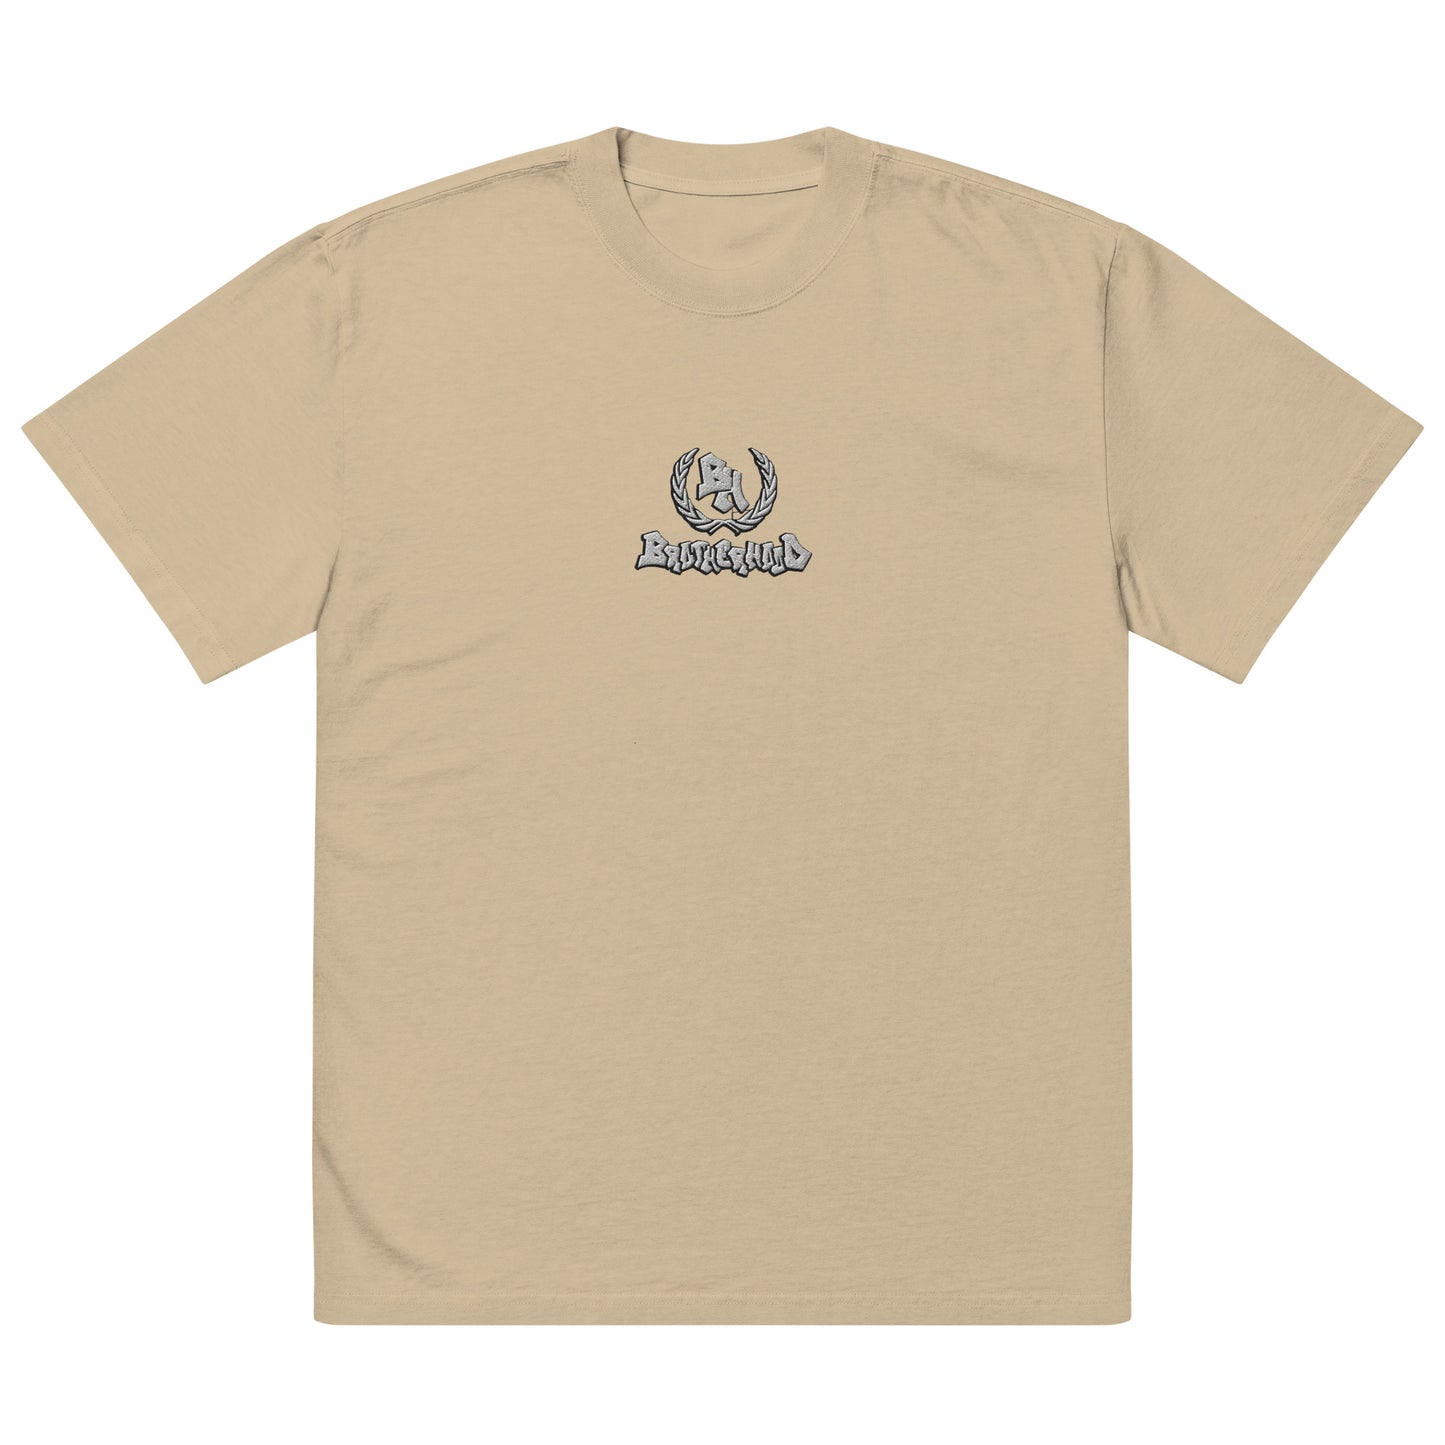 Oversized faded t-shirt faded khaki. A loose-fitting, worn-out t-shirt with the word "Brotherhood" and the Brotherhood Logo printed on it